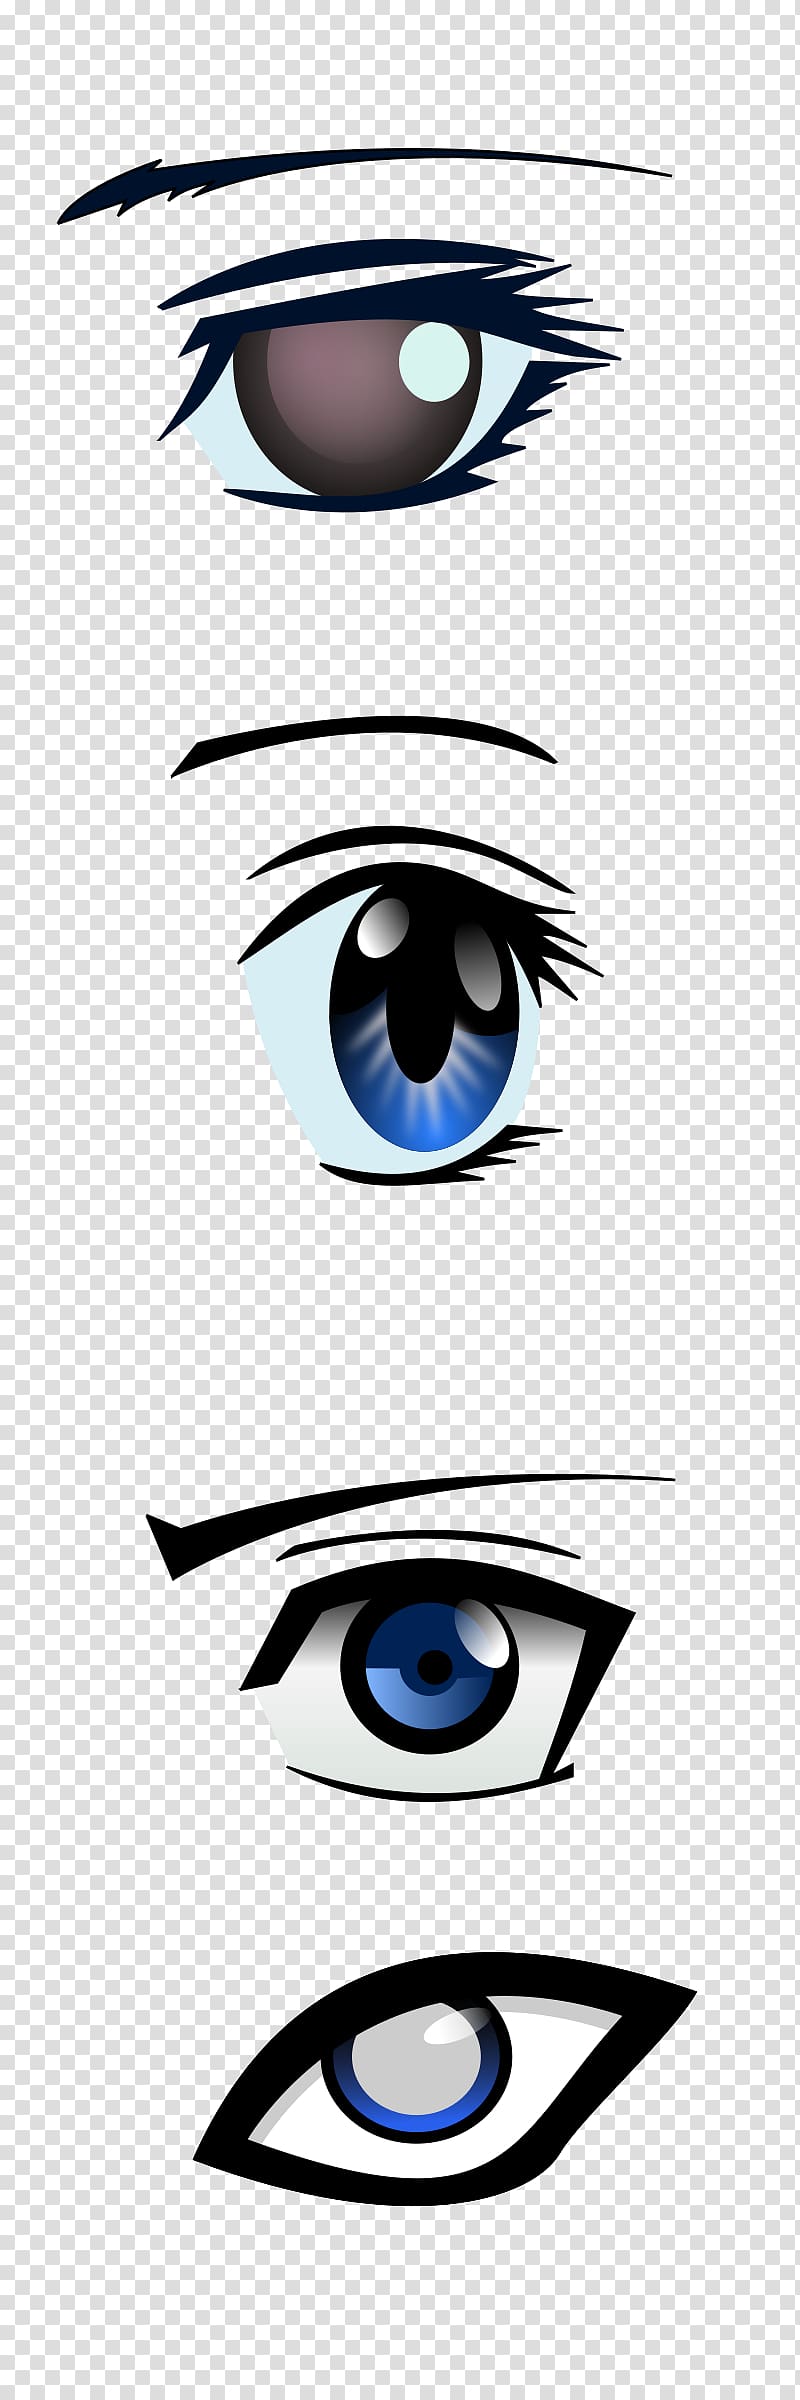 How To Draw Anime Male Eyes, Step by Step, Drawing Guide, by Dawn - DragoArt